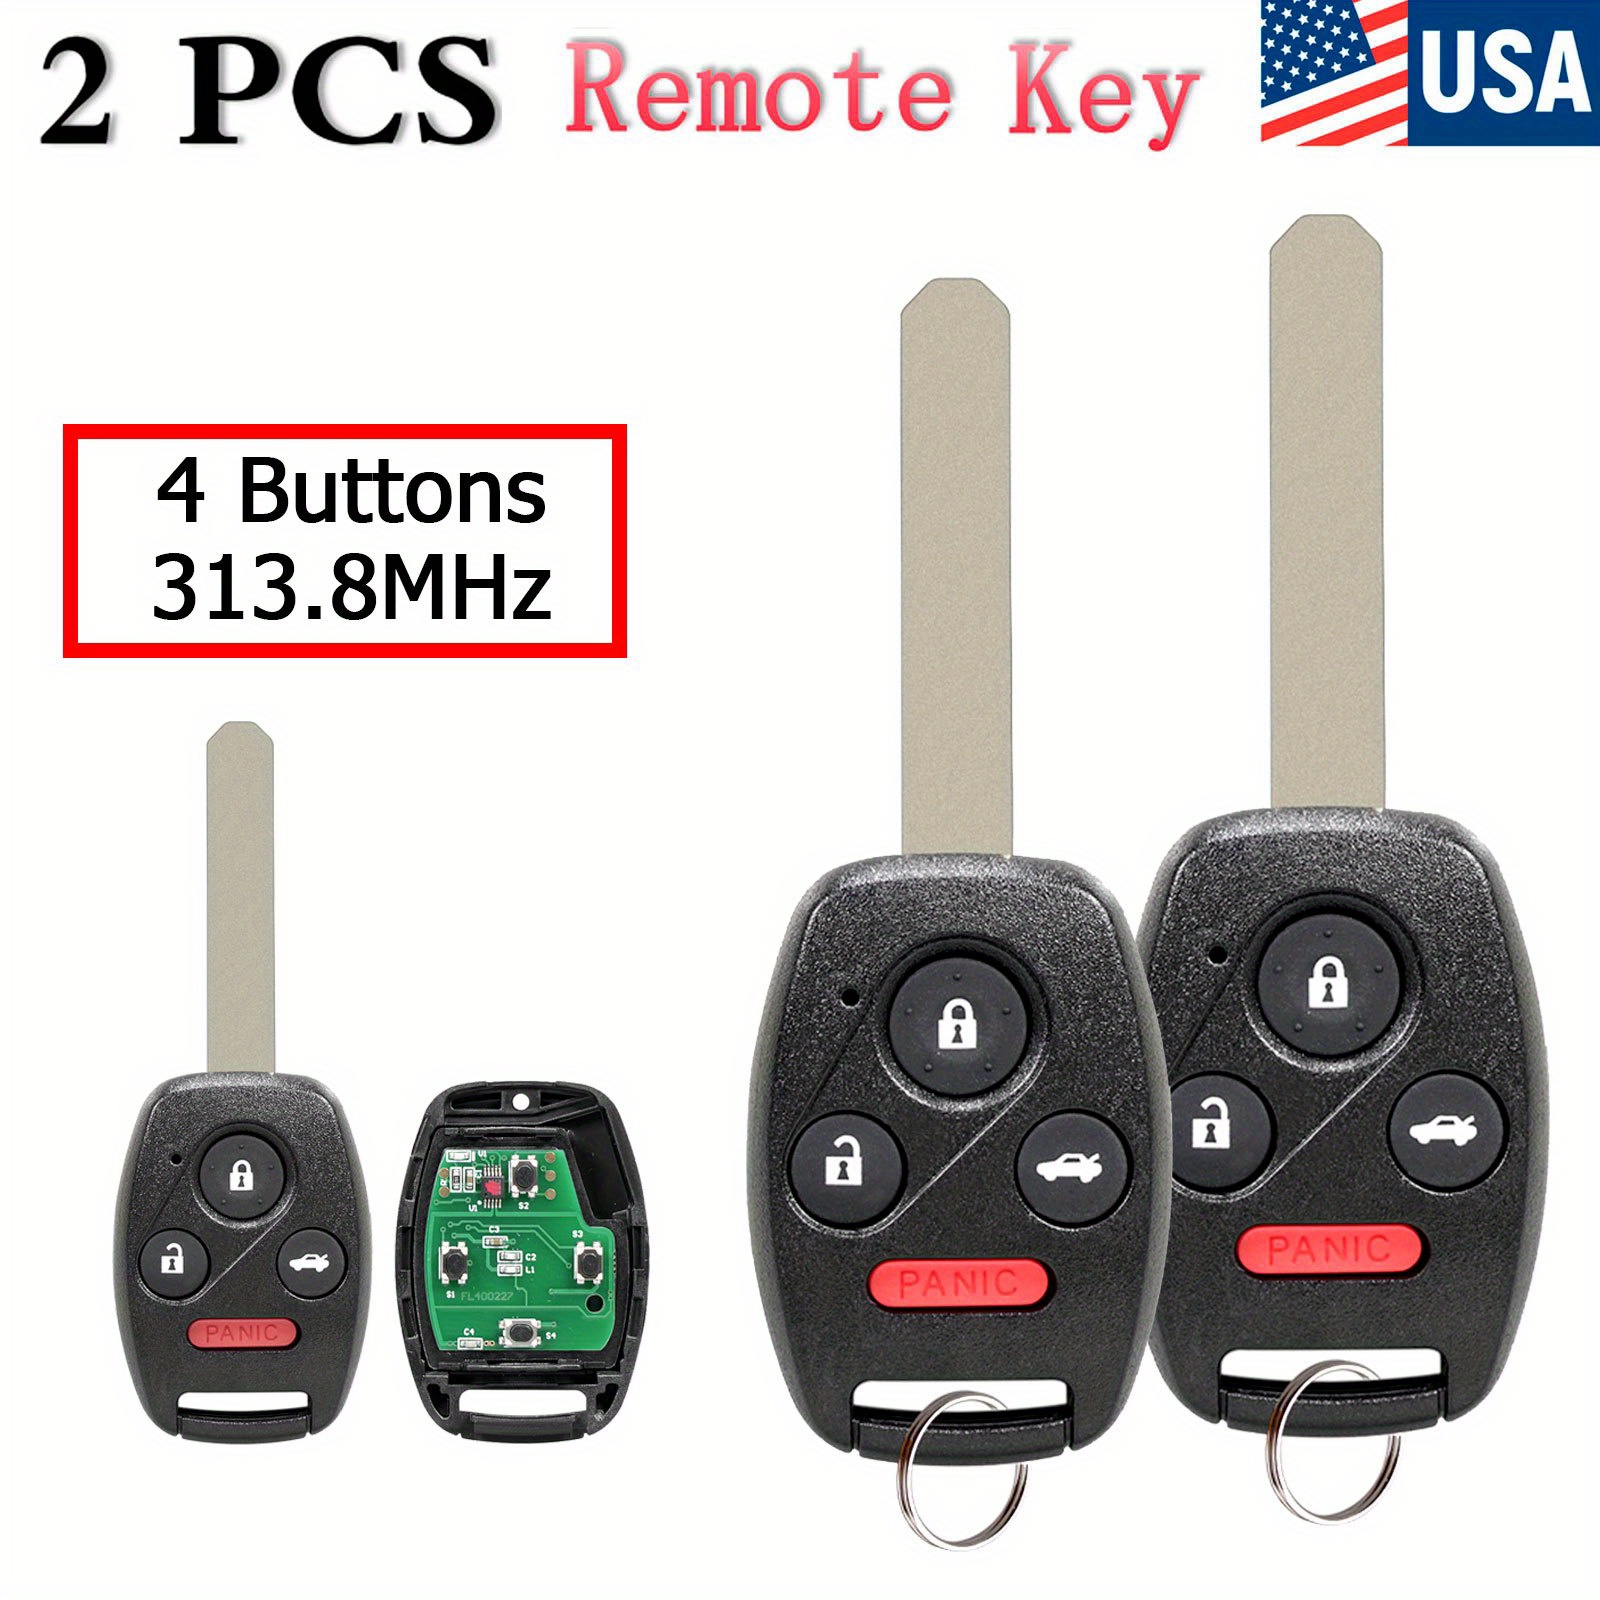 

2pcs Remote Car Key Fob 4 Buttons For Honda For Accord For Sedan For For Touring For Fcc Id Kr55wk49308